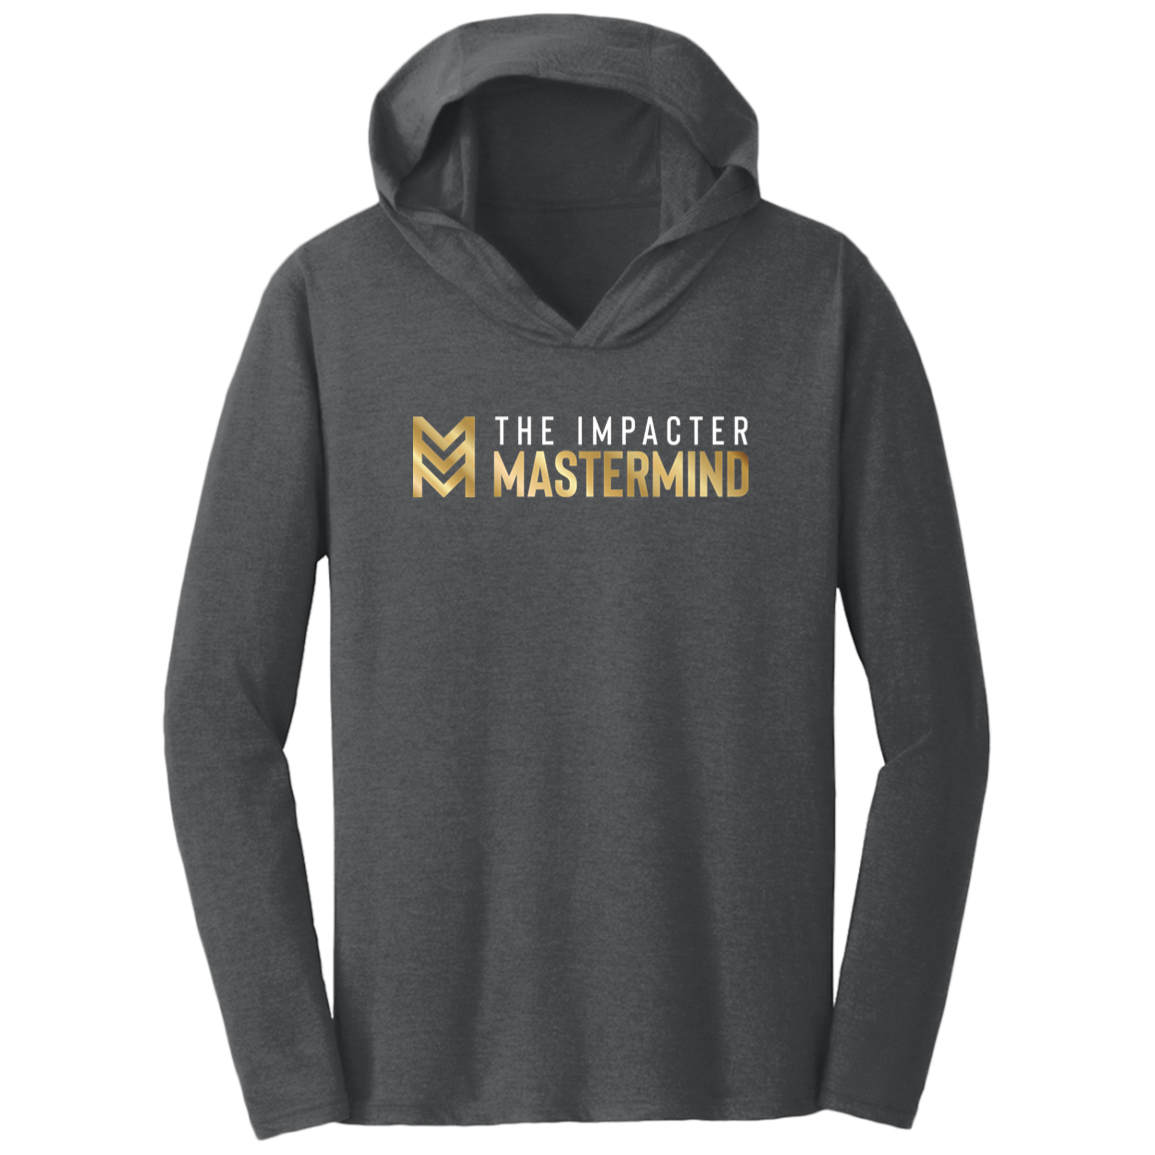 The Impacter Mastermind - T-Shirt Hoodie